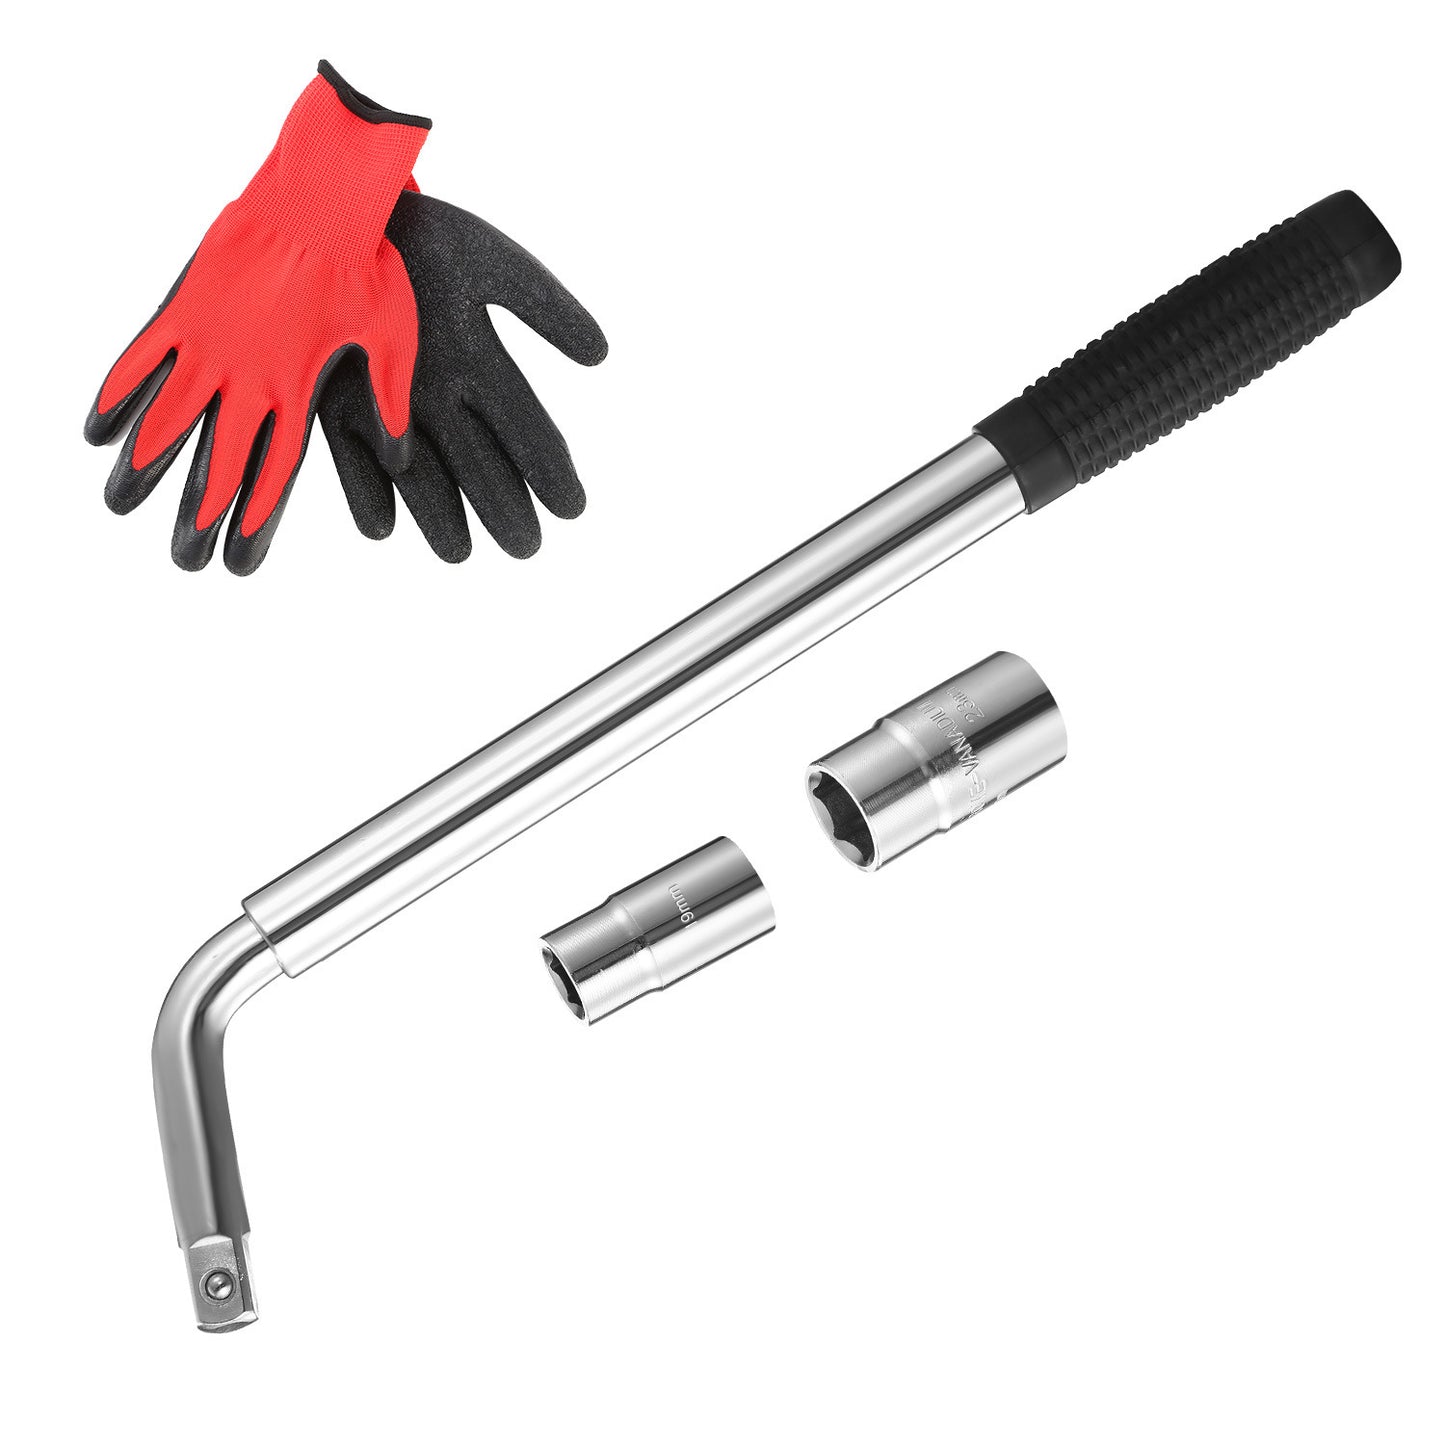 Telescoping Lug Wrench Extendable Tire Wheel Nut Wrench with CR-V Sockets 17mm 19mm 21mm 23mm Free Work Gloves